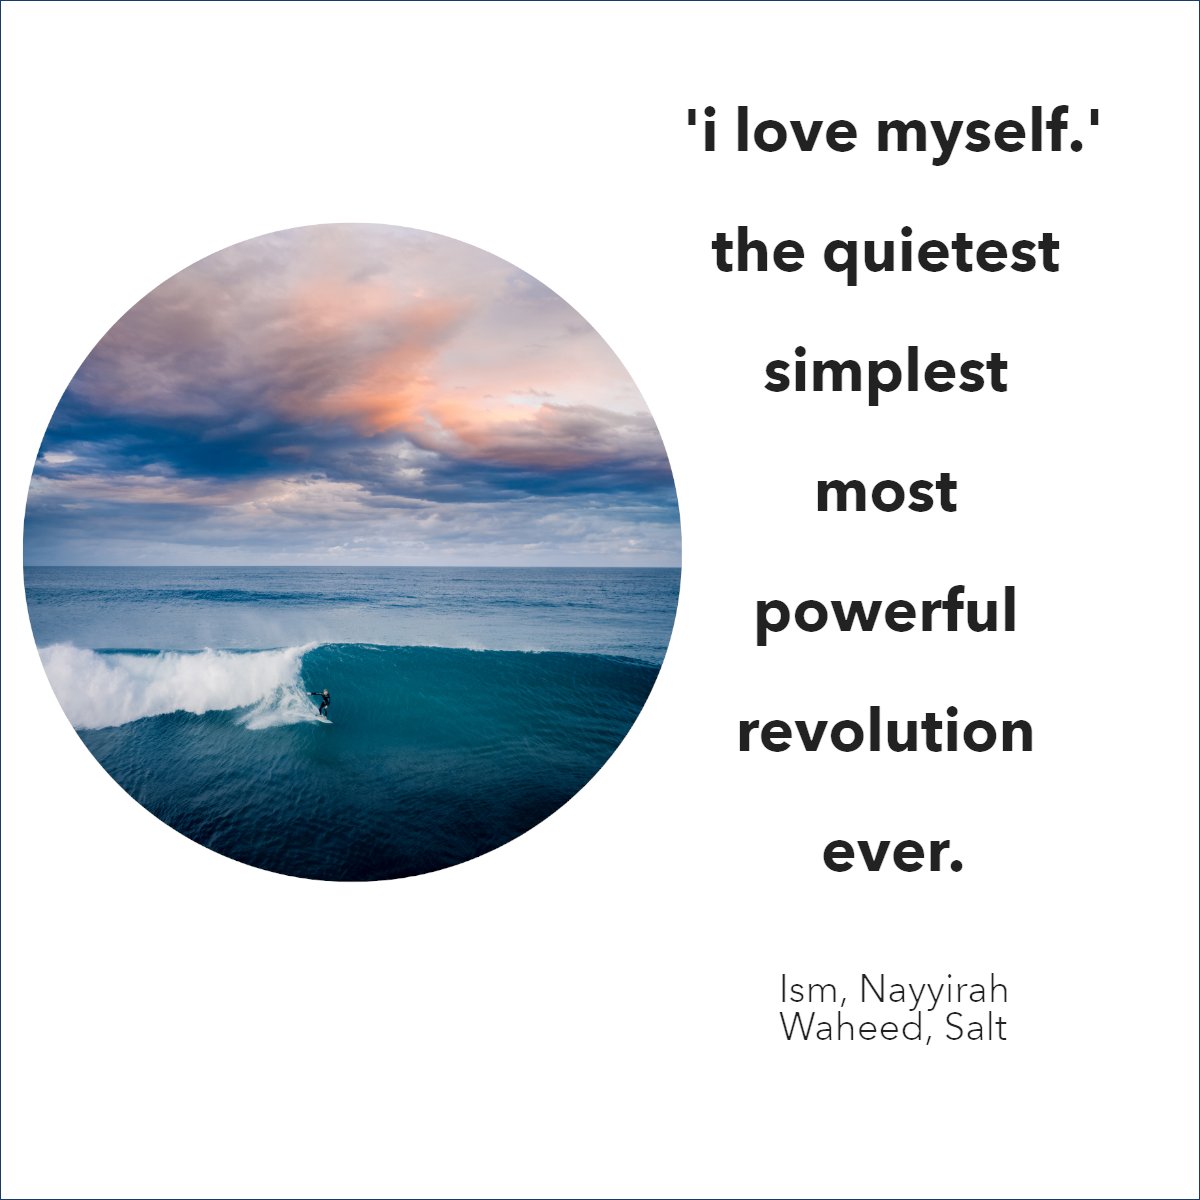 Love yourself 🤗❤️

#loveyourself    #quotesaboutlife    #i_love_myself    #beingmyself❤️    #feelingmyself    #wisdomquotes    #wisdomgoals
#PensacolaHomesForSale #PensacolaHomes #JimDey #RealEstateInfo